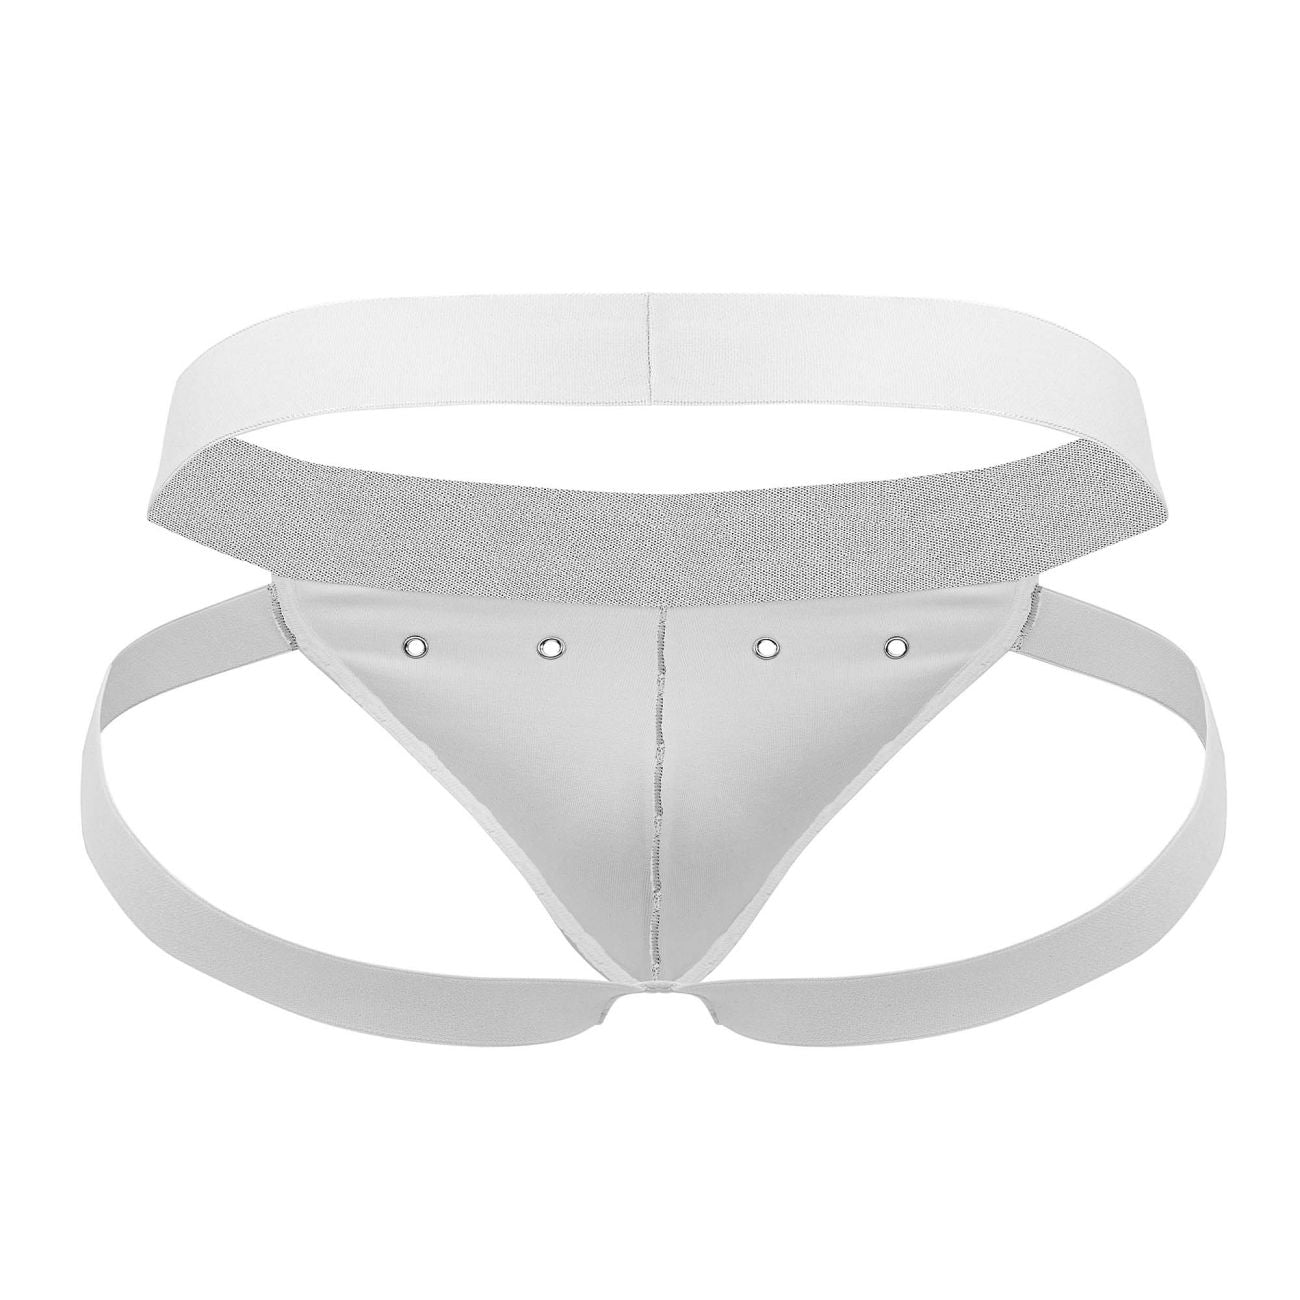 Roger Smuth RS088 Jock-Thong White